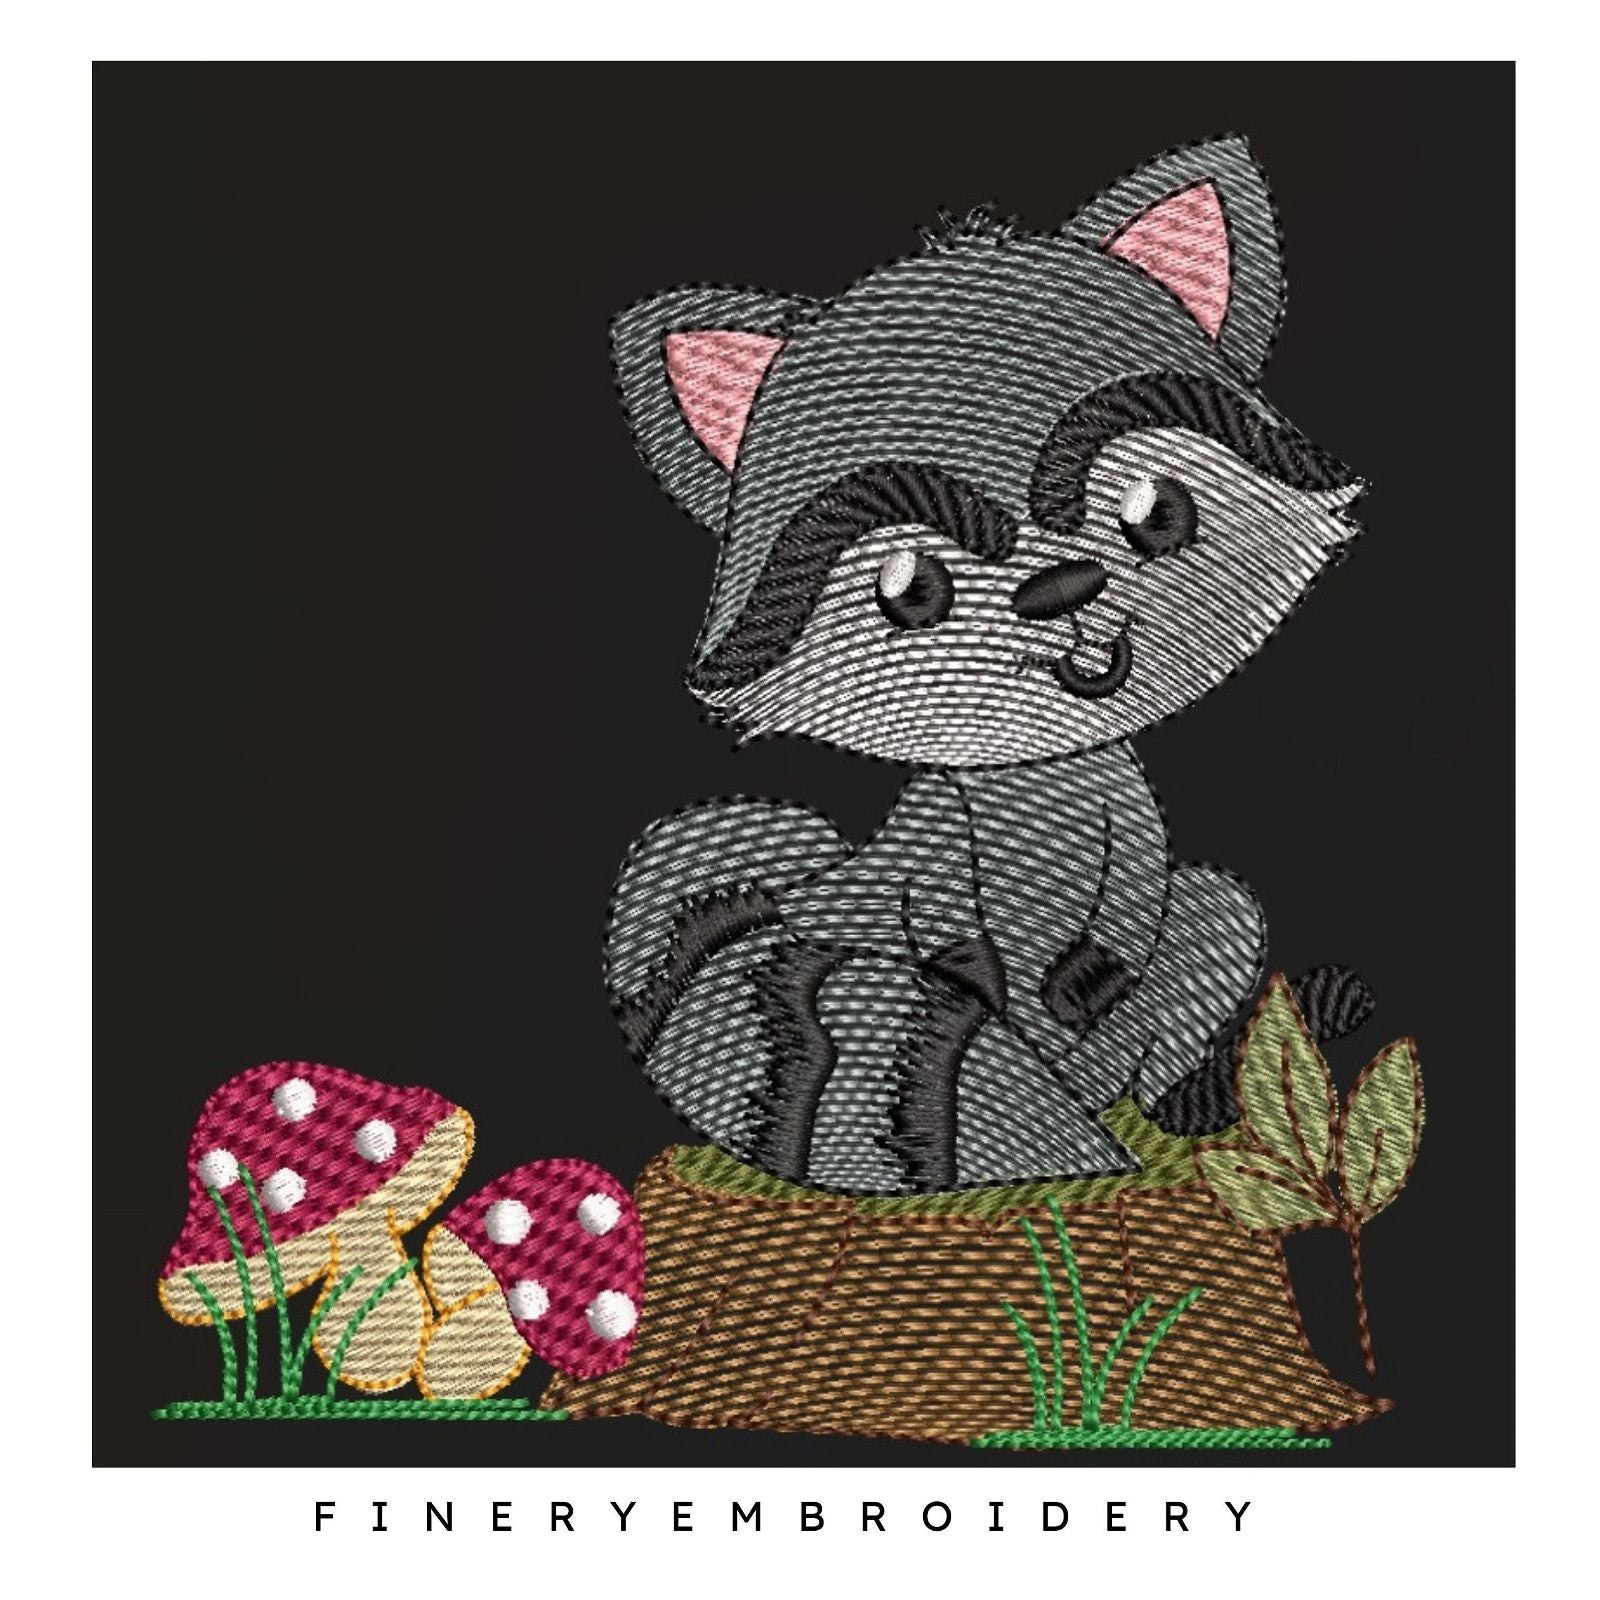 Racoon - Embroidery design - FineryEmbroidery